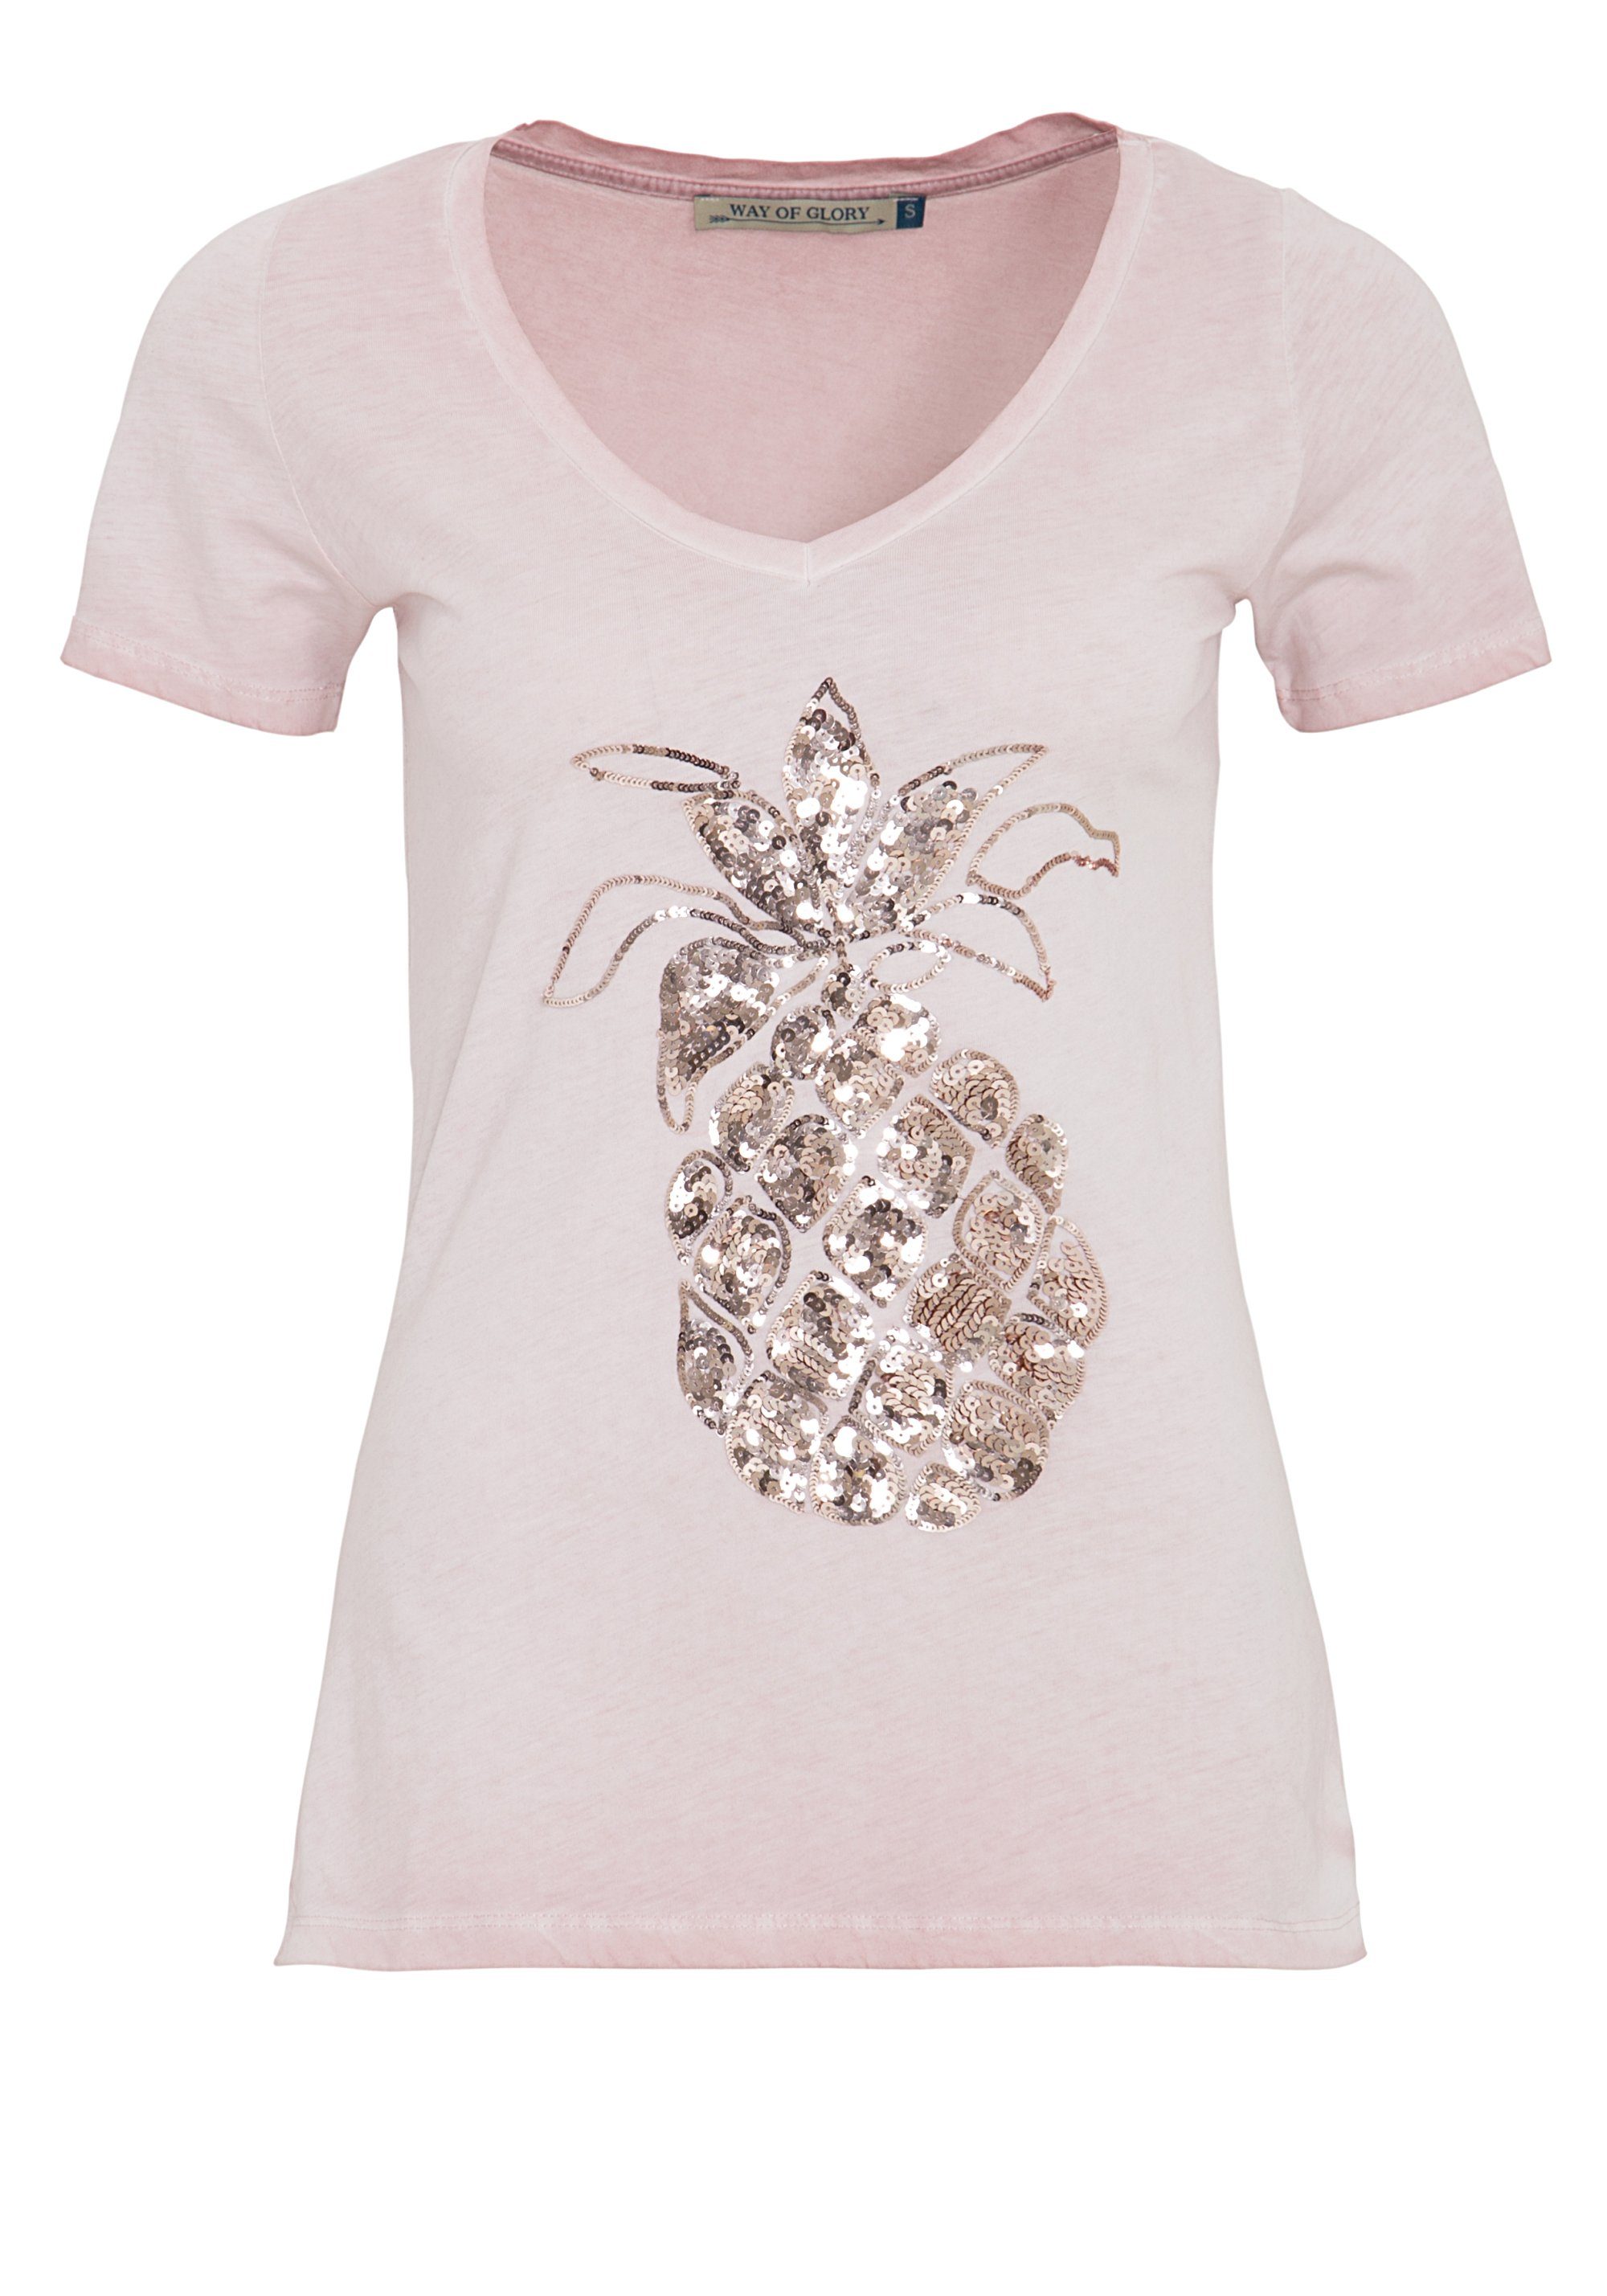 Way of Glory T-Shirt mit Pailletten Motiv in Used Waschung rosa